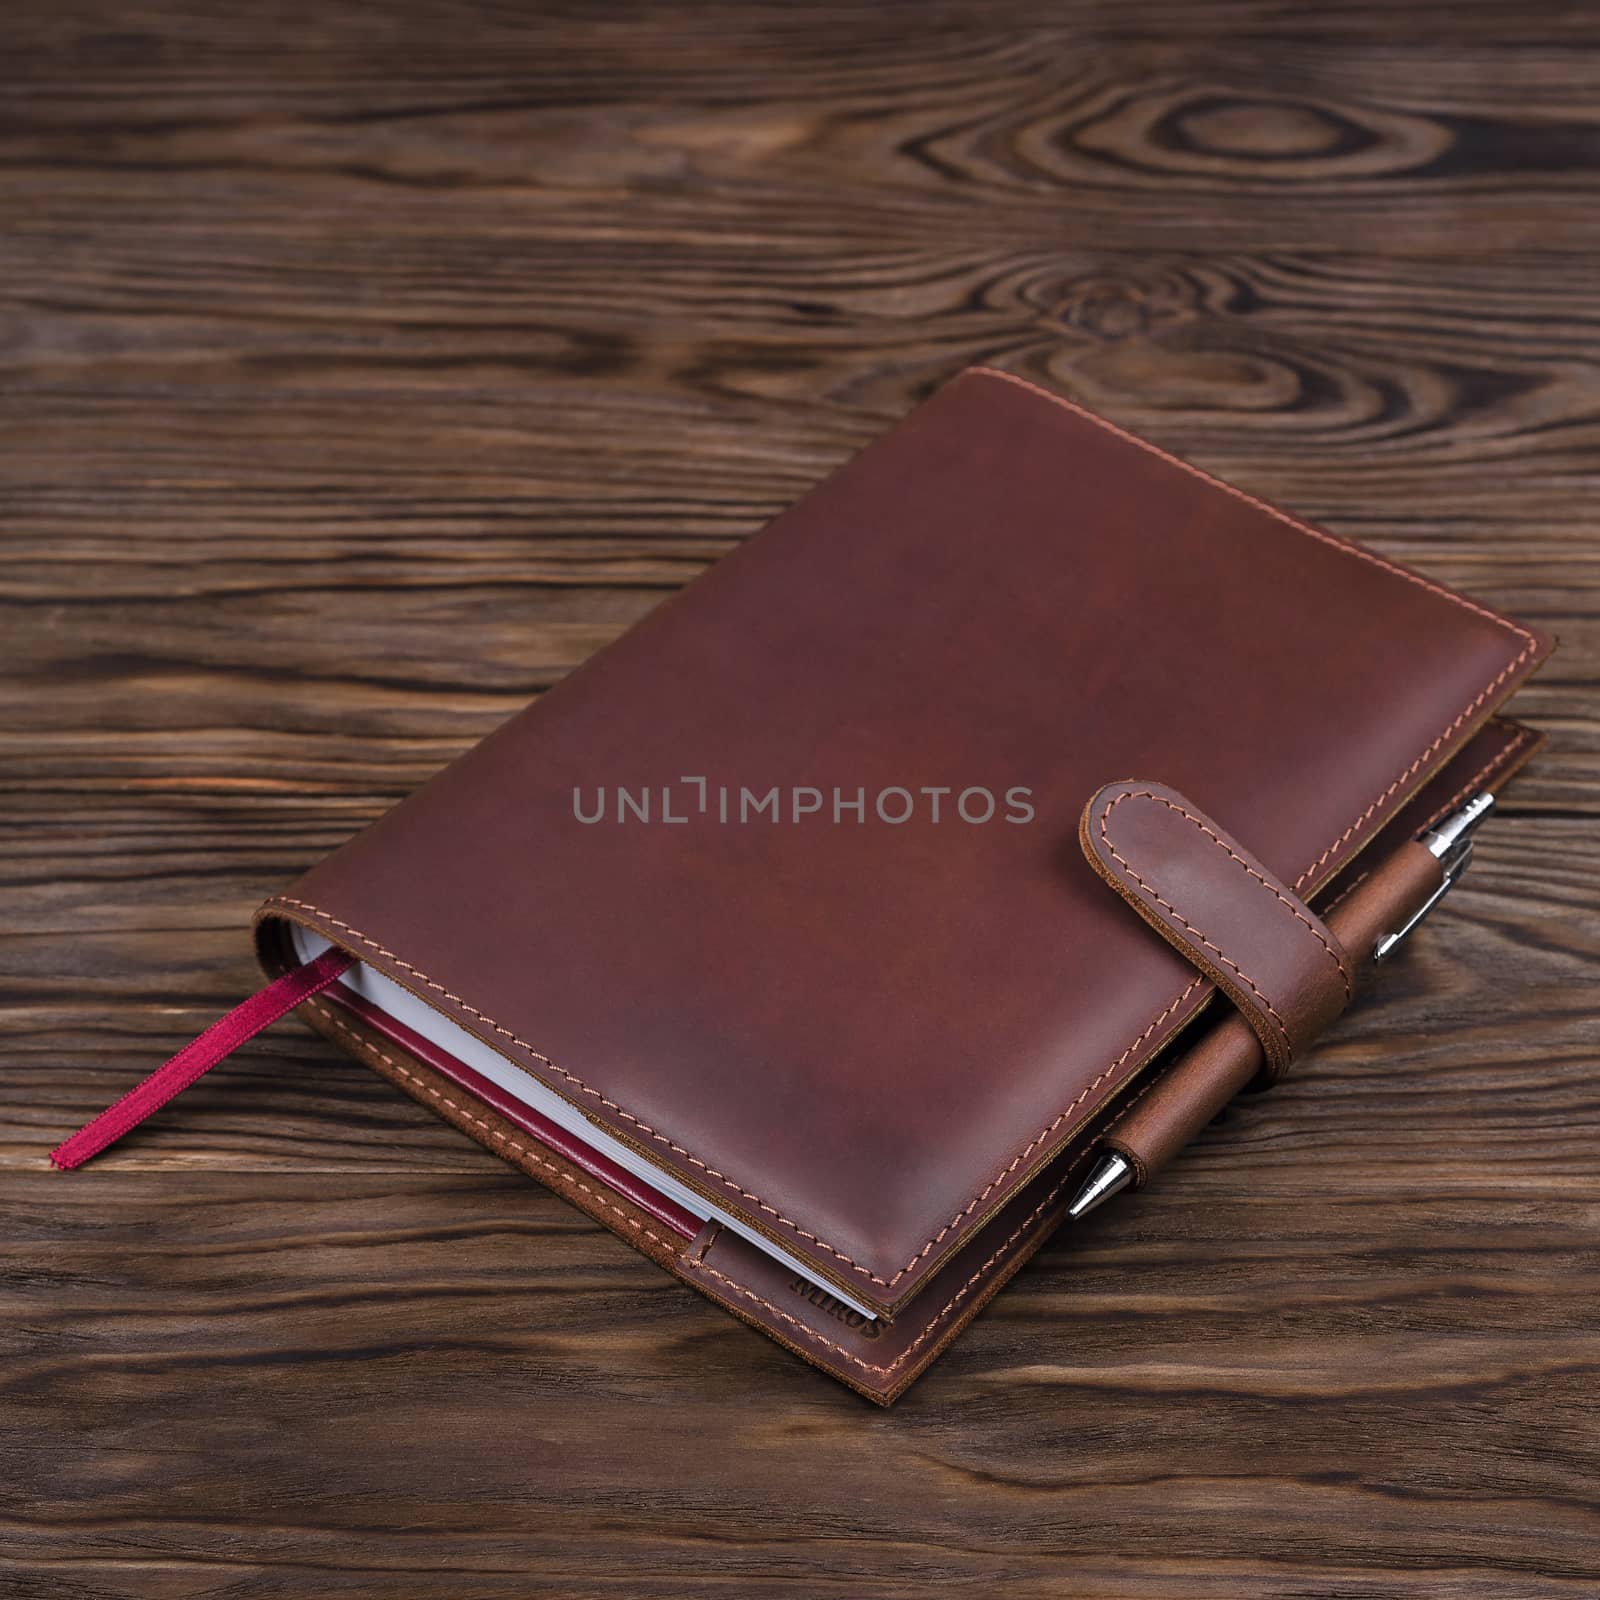 Red color handmade leather notebook cover with notebook and pen inside on wooden background. Stock photo of luxury business accessories. by alexsdriver